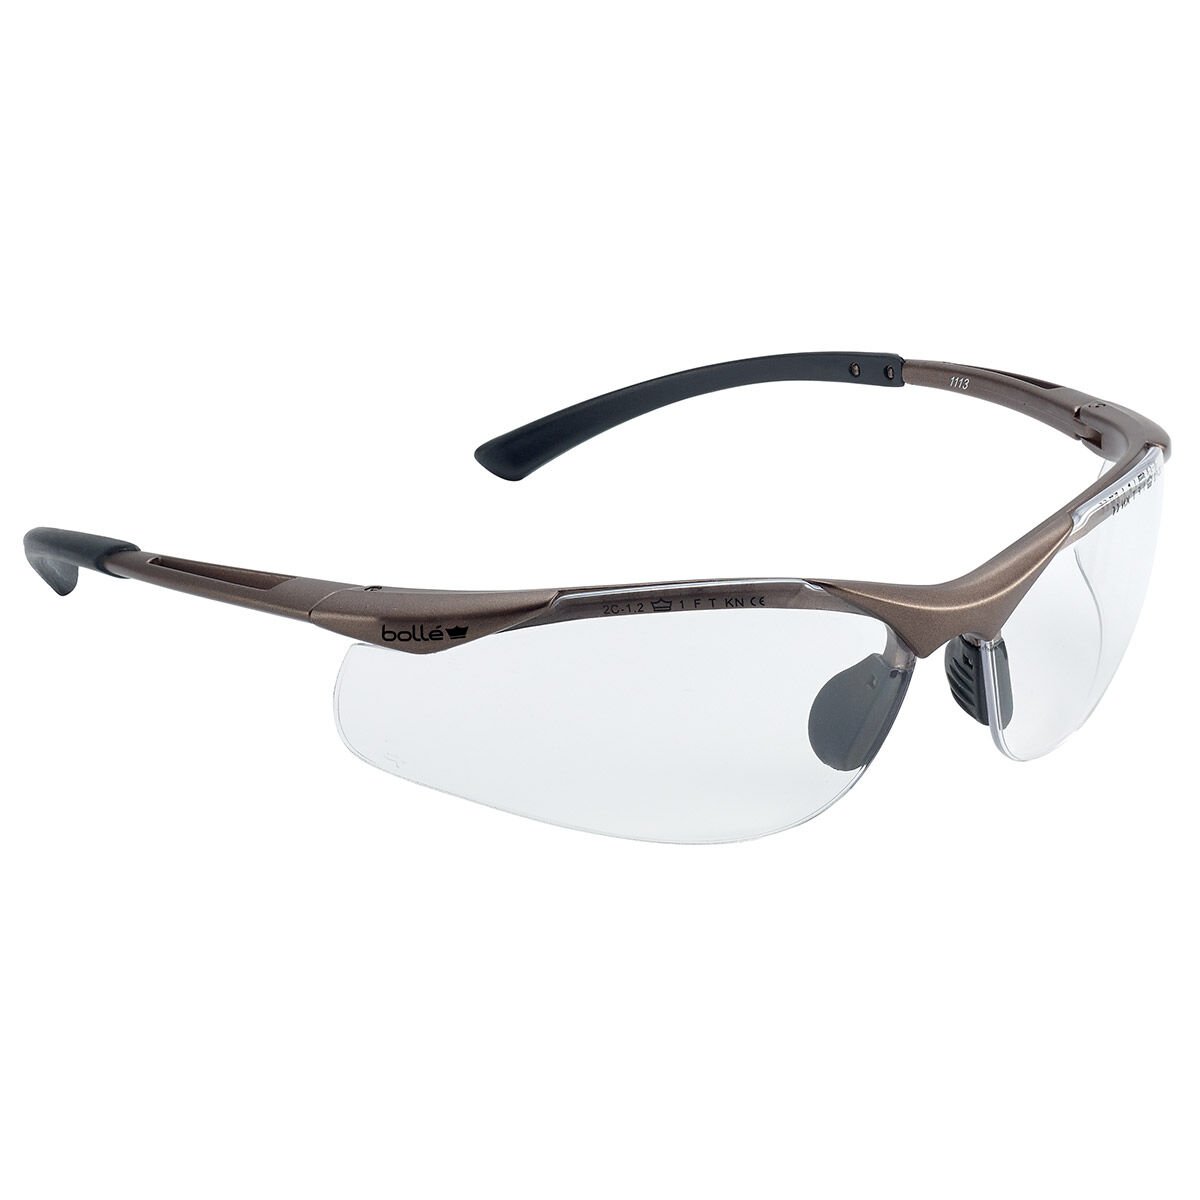 Bollé Safety 253-CT-40047 Contour Safety Eyewear with Semi-Rimless Nylon Frame and ESP Tinted Anti-Fog Lens Protective Industrial Products